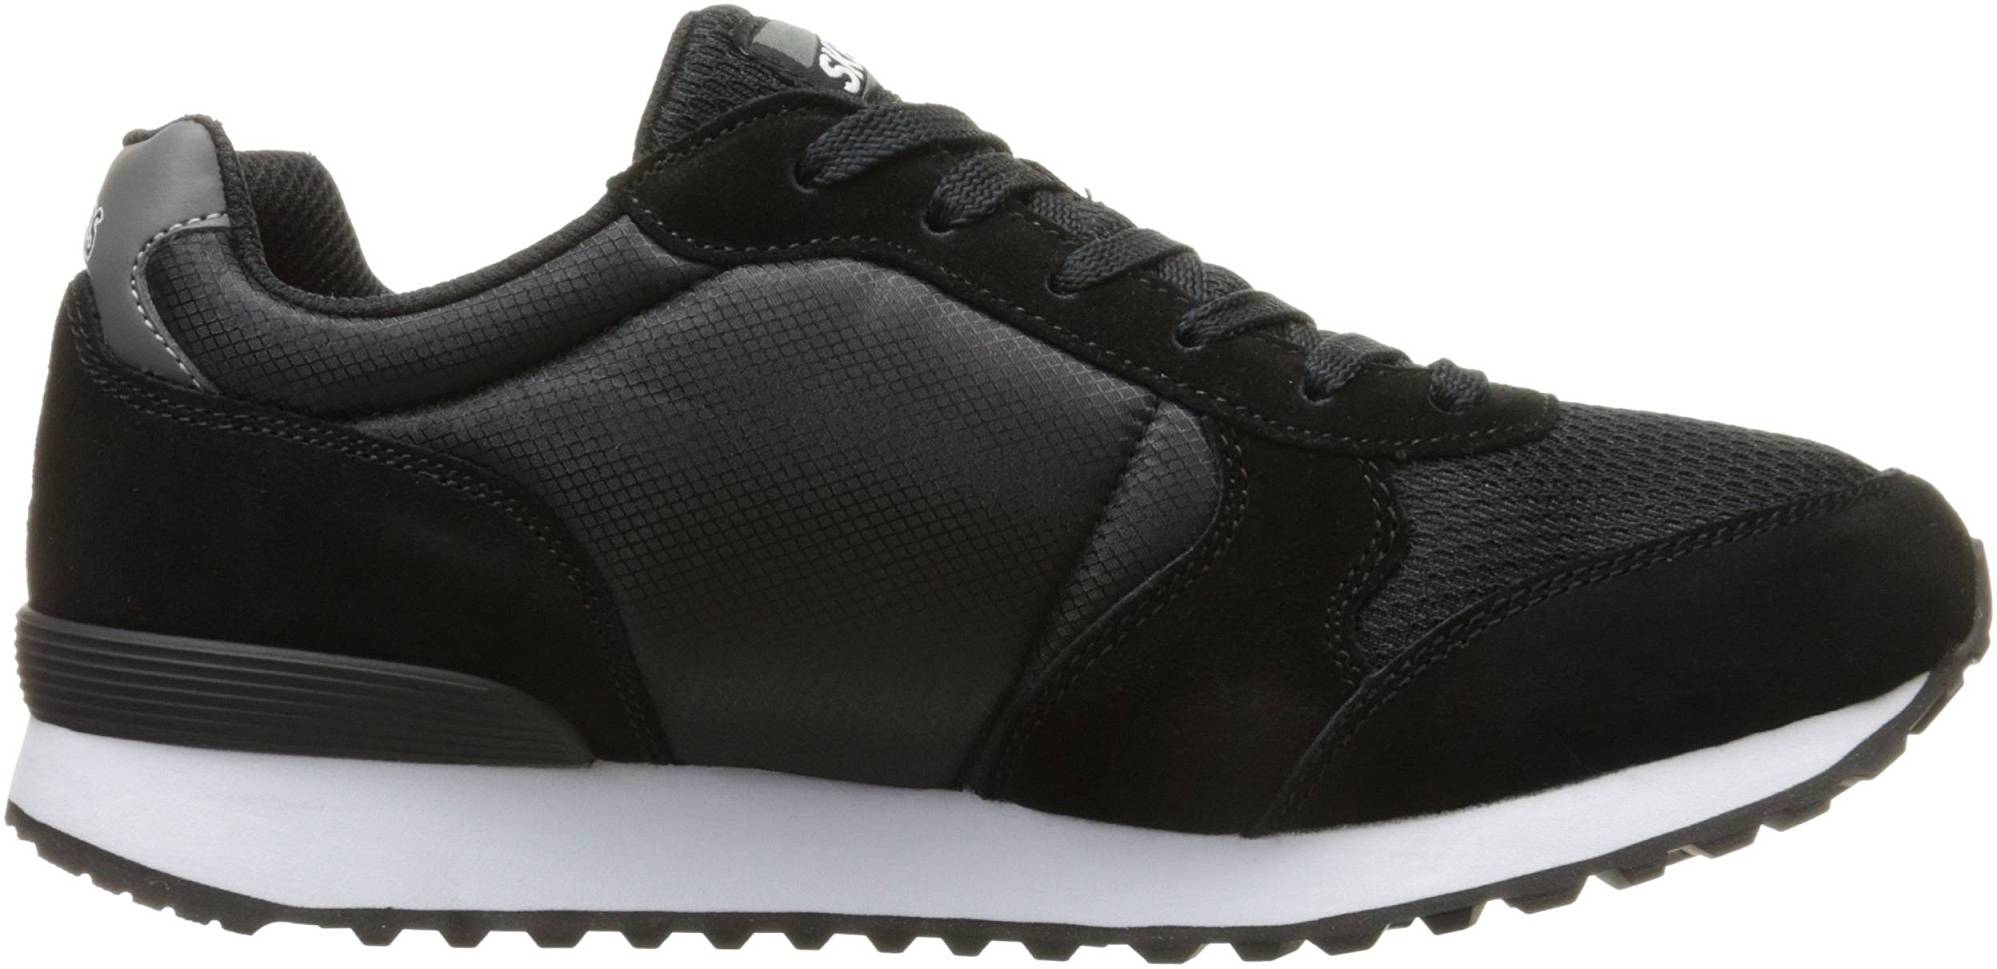 Skechers OG 85 – Shoes Reviews & Reasons To Buy